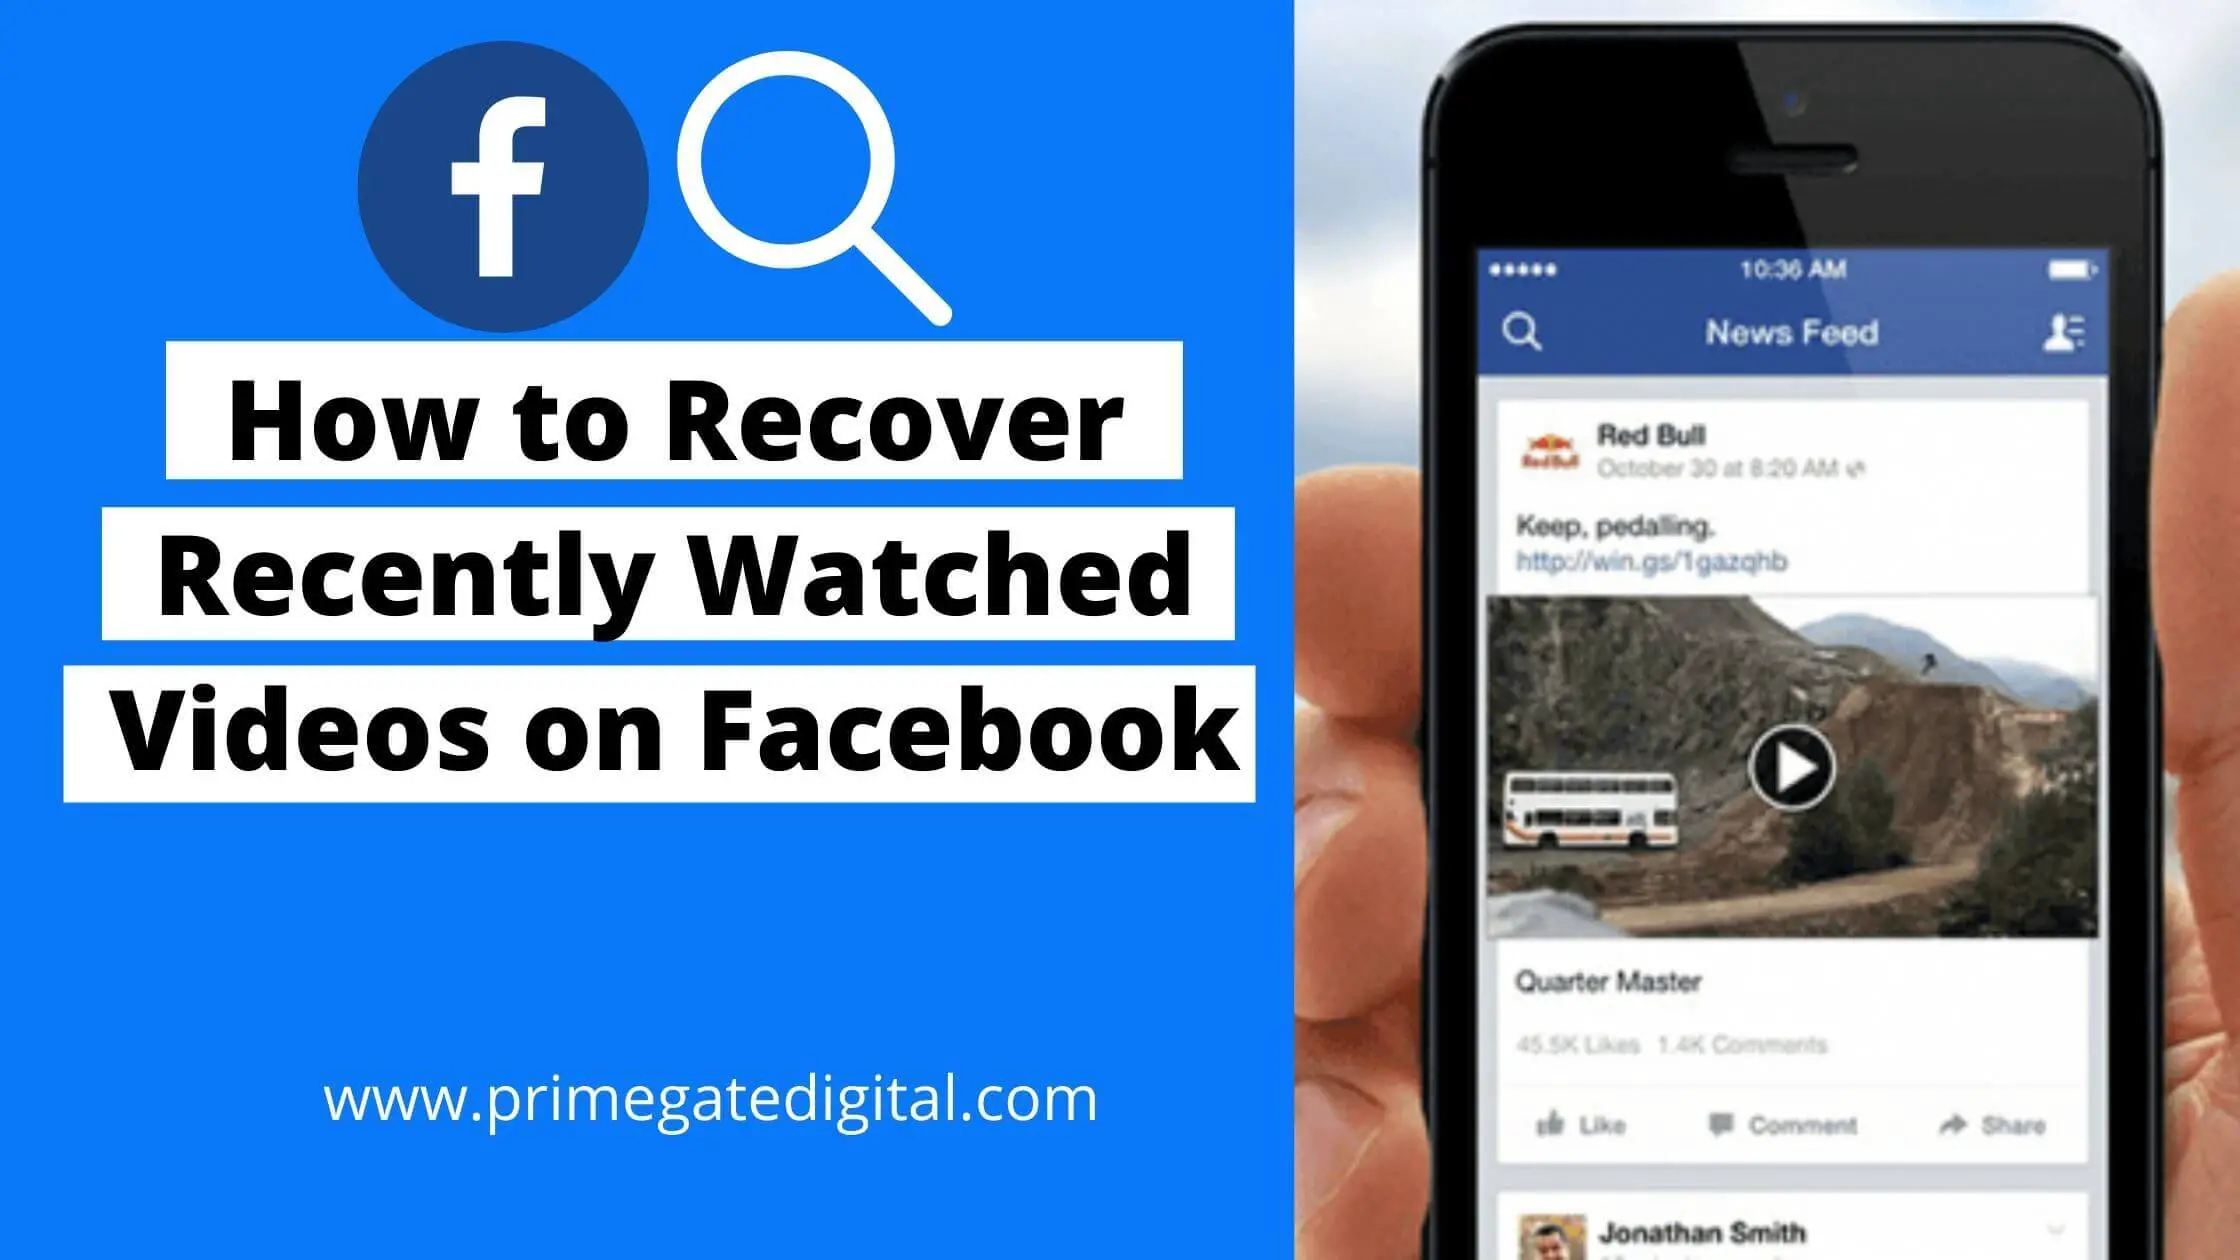 How to Recover Recently Watched Videos on Facebook